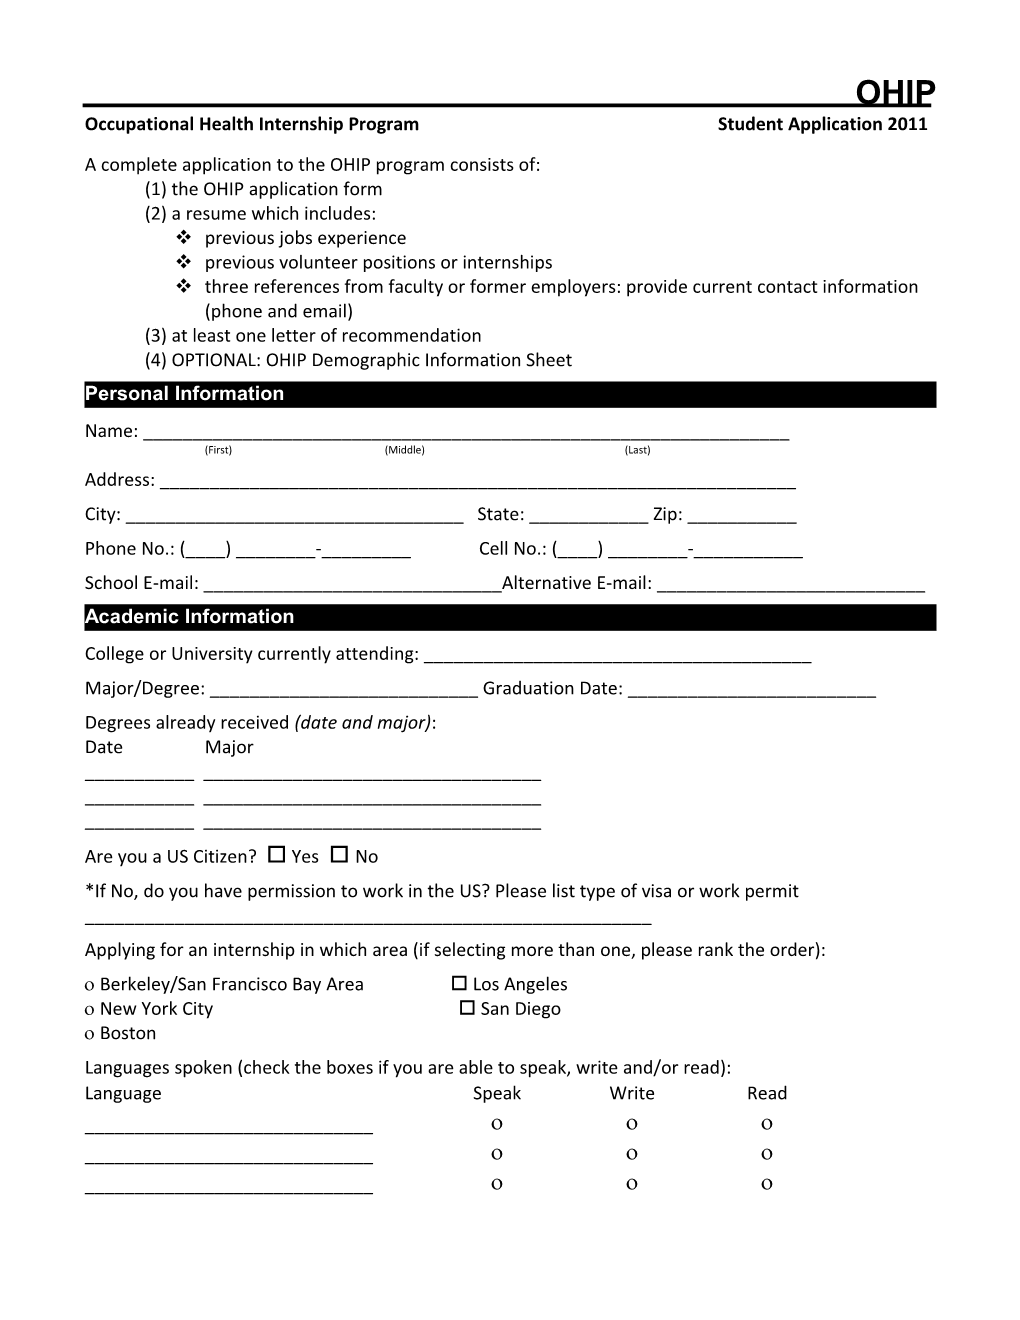 Student Application for Summer 2005